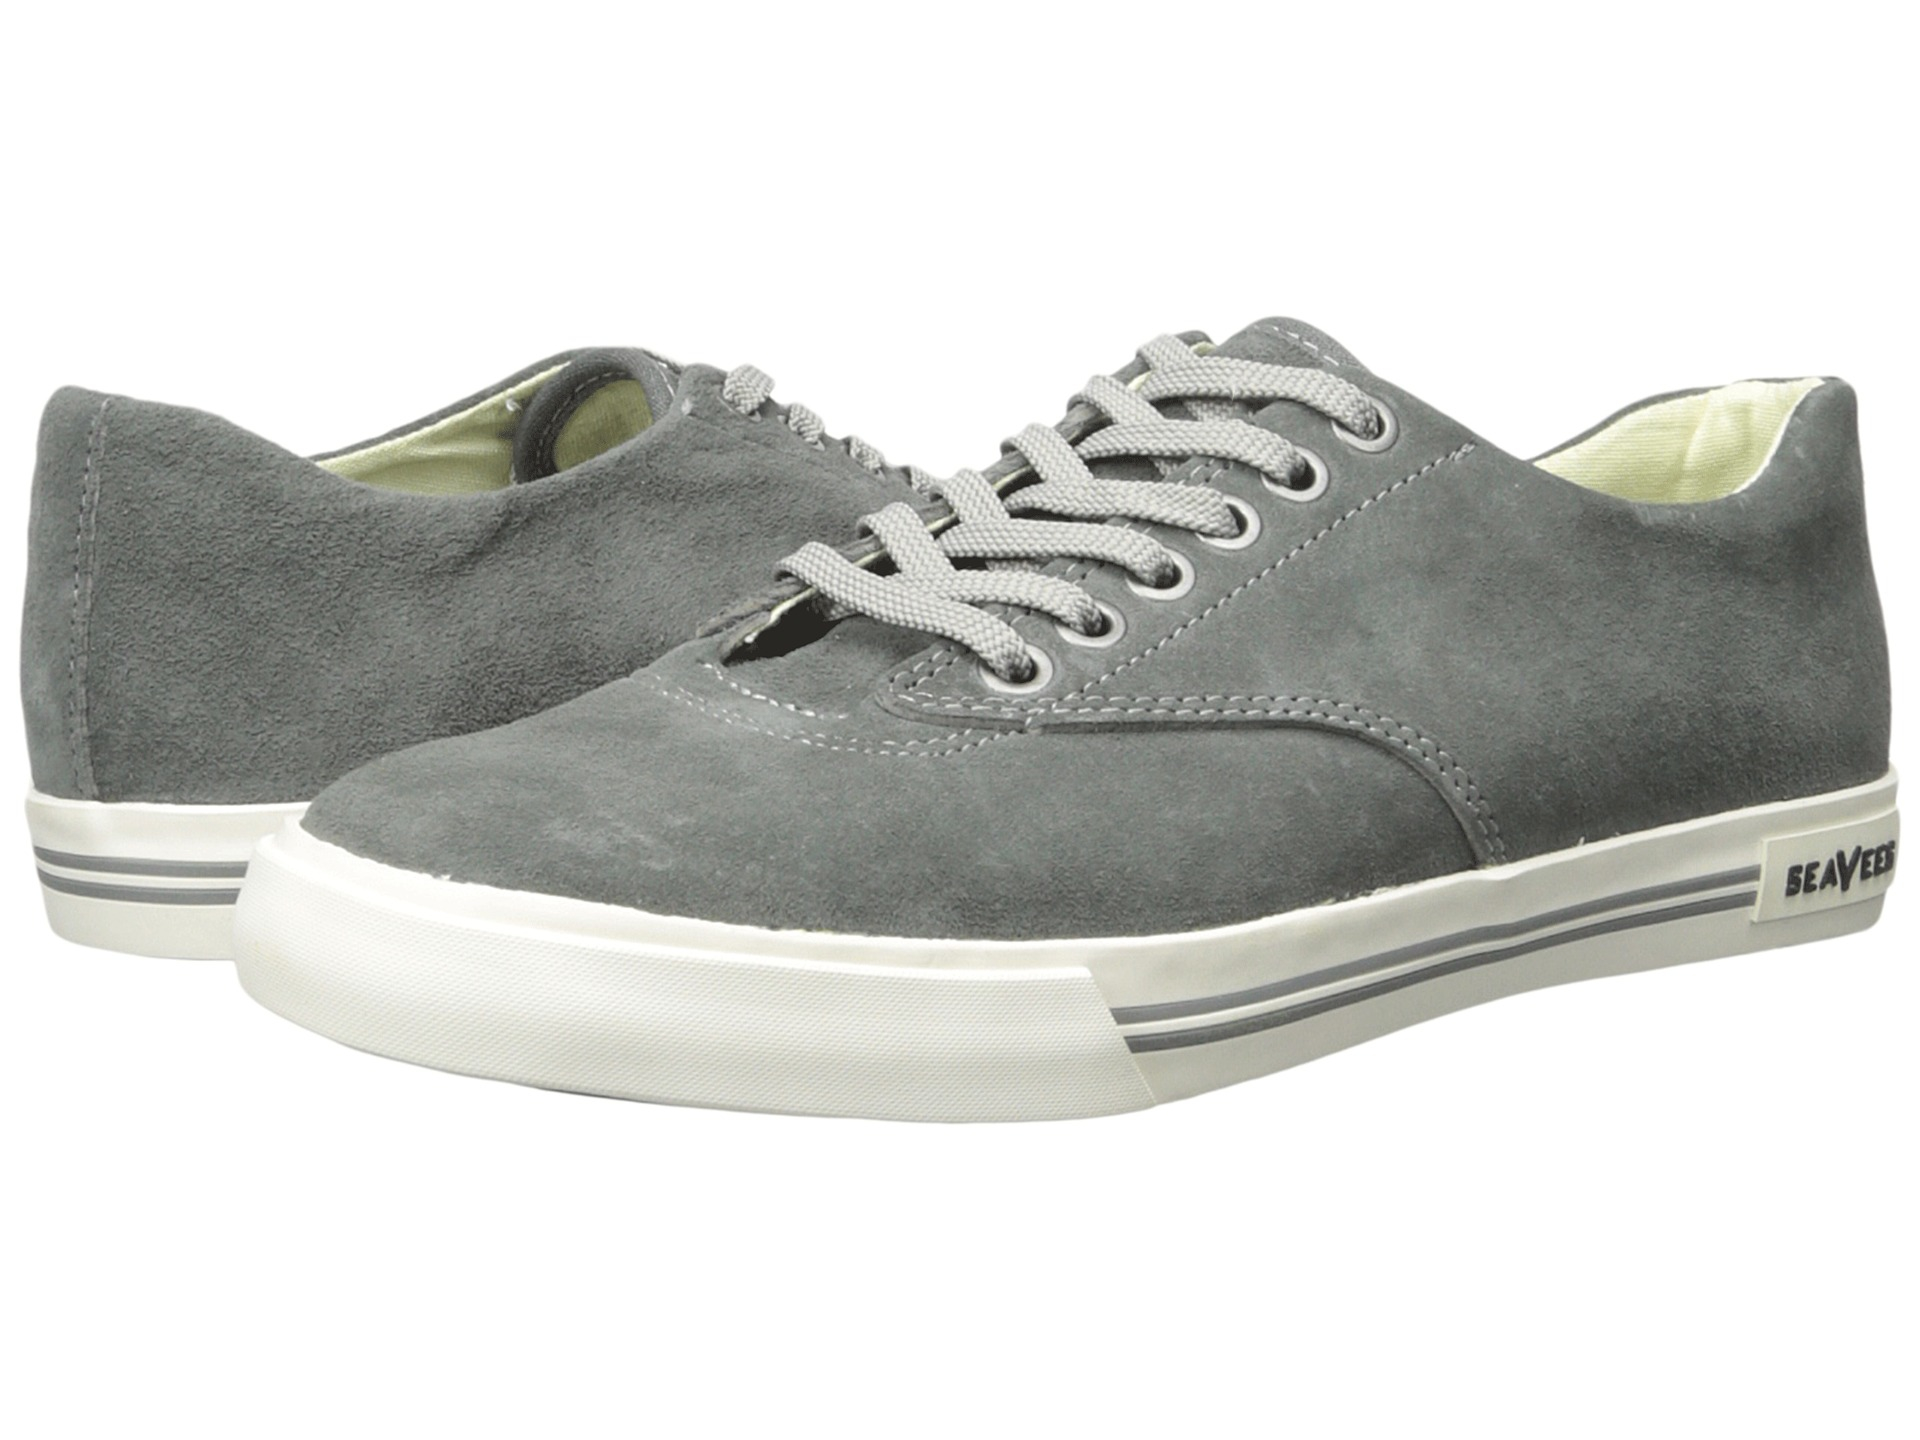 Lyst - Seavees 08/63 Hermosa Plimsoll Riv in Blue for Men